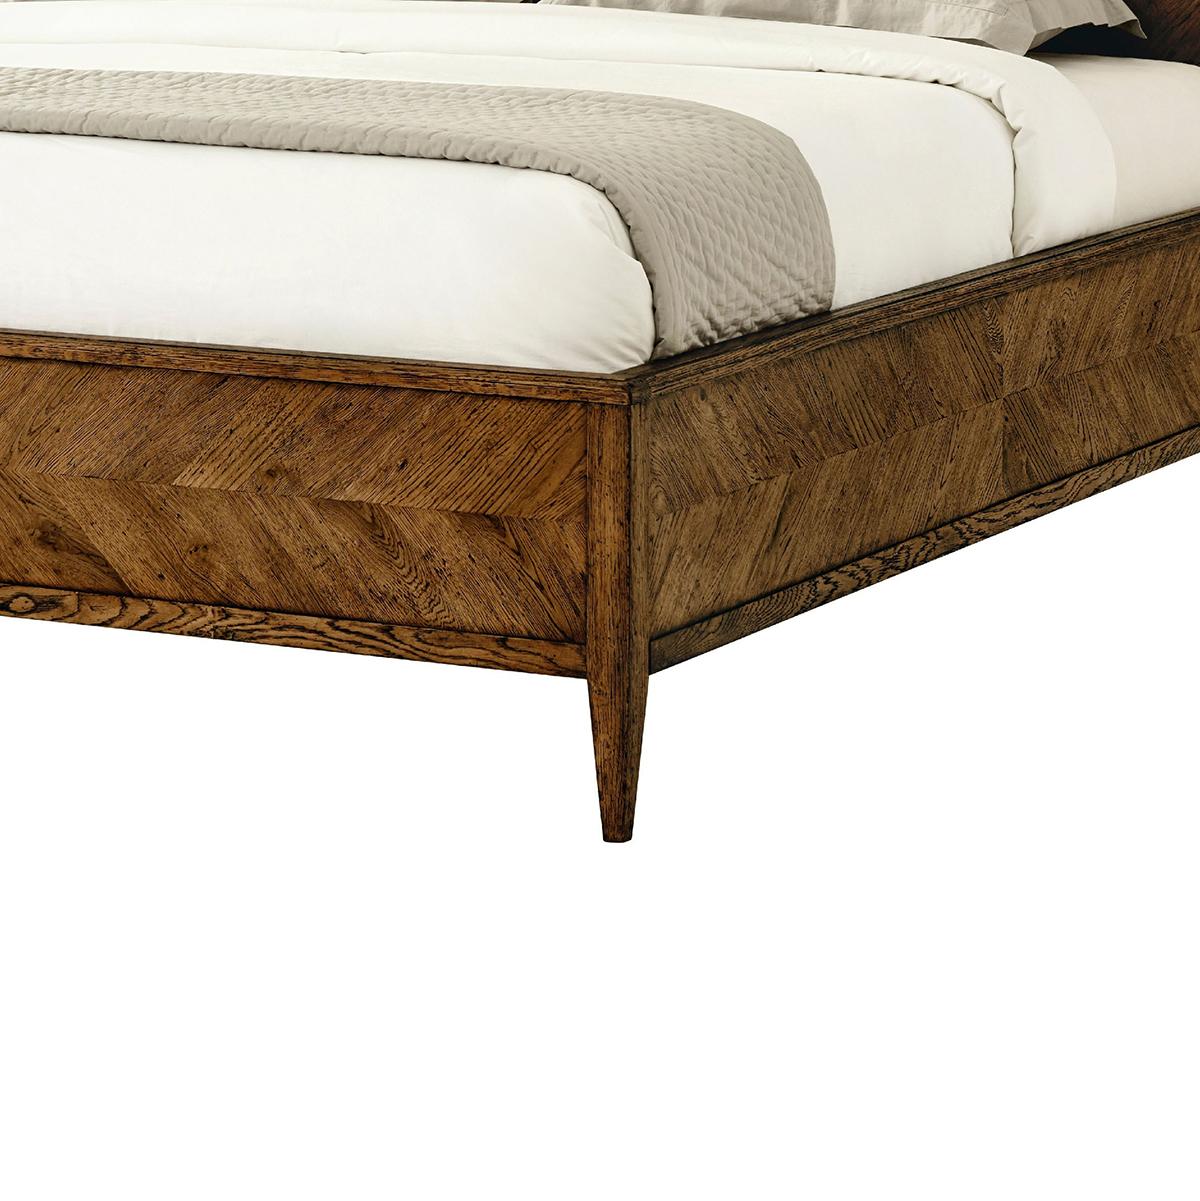 Modern Rustic Oak California King Bed - Dark In New Condition For Sale In Westwood, NJ